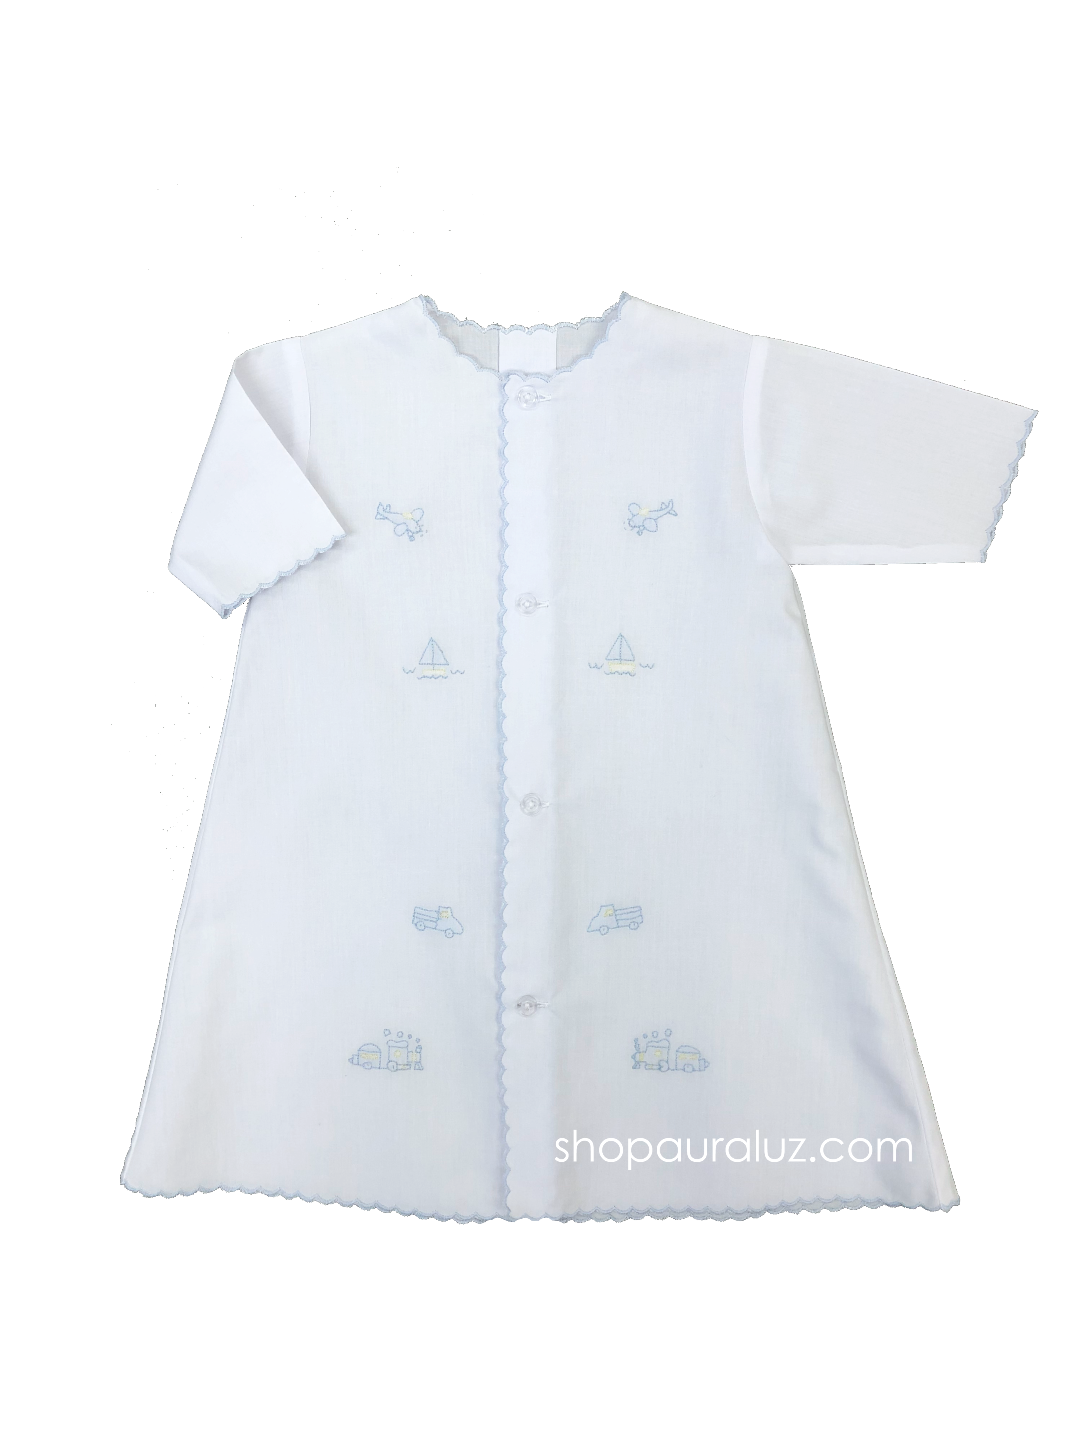 Auraluz Day Gown, l/s..White with blue scallops and transportation embroideries